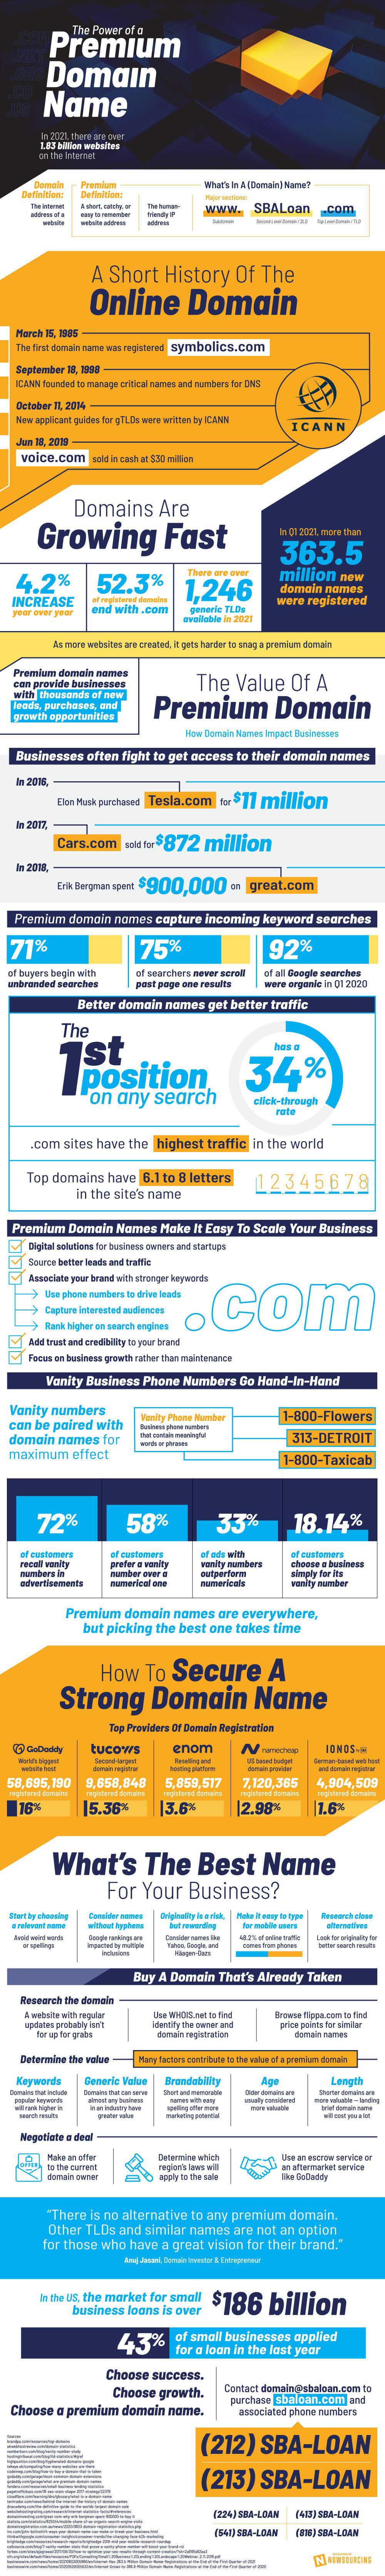 Why Premium Domain Names Are Important